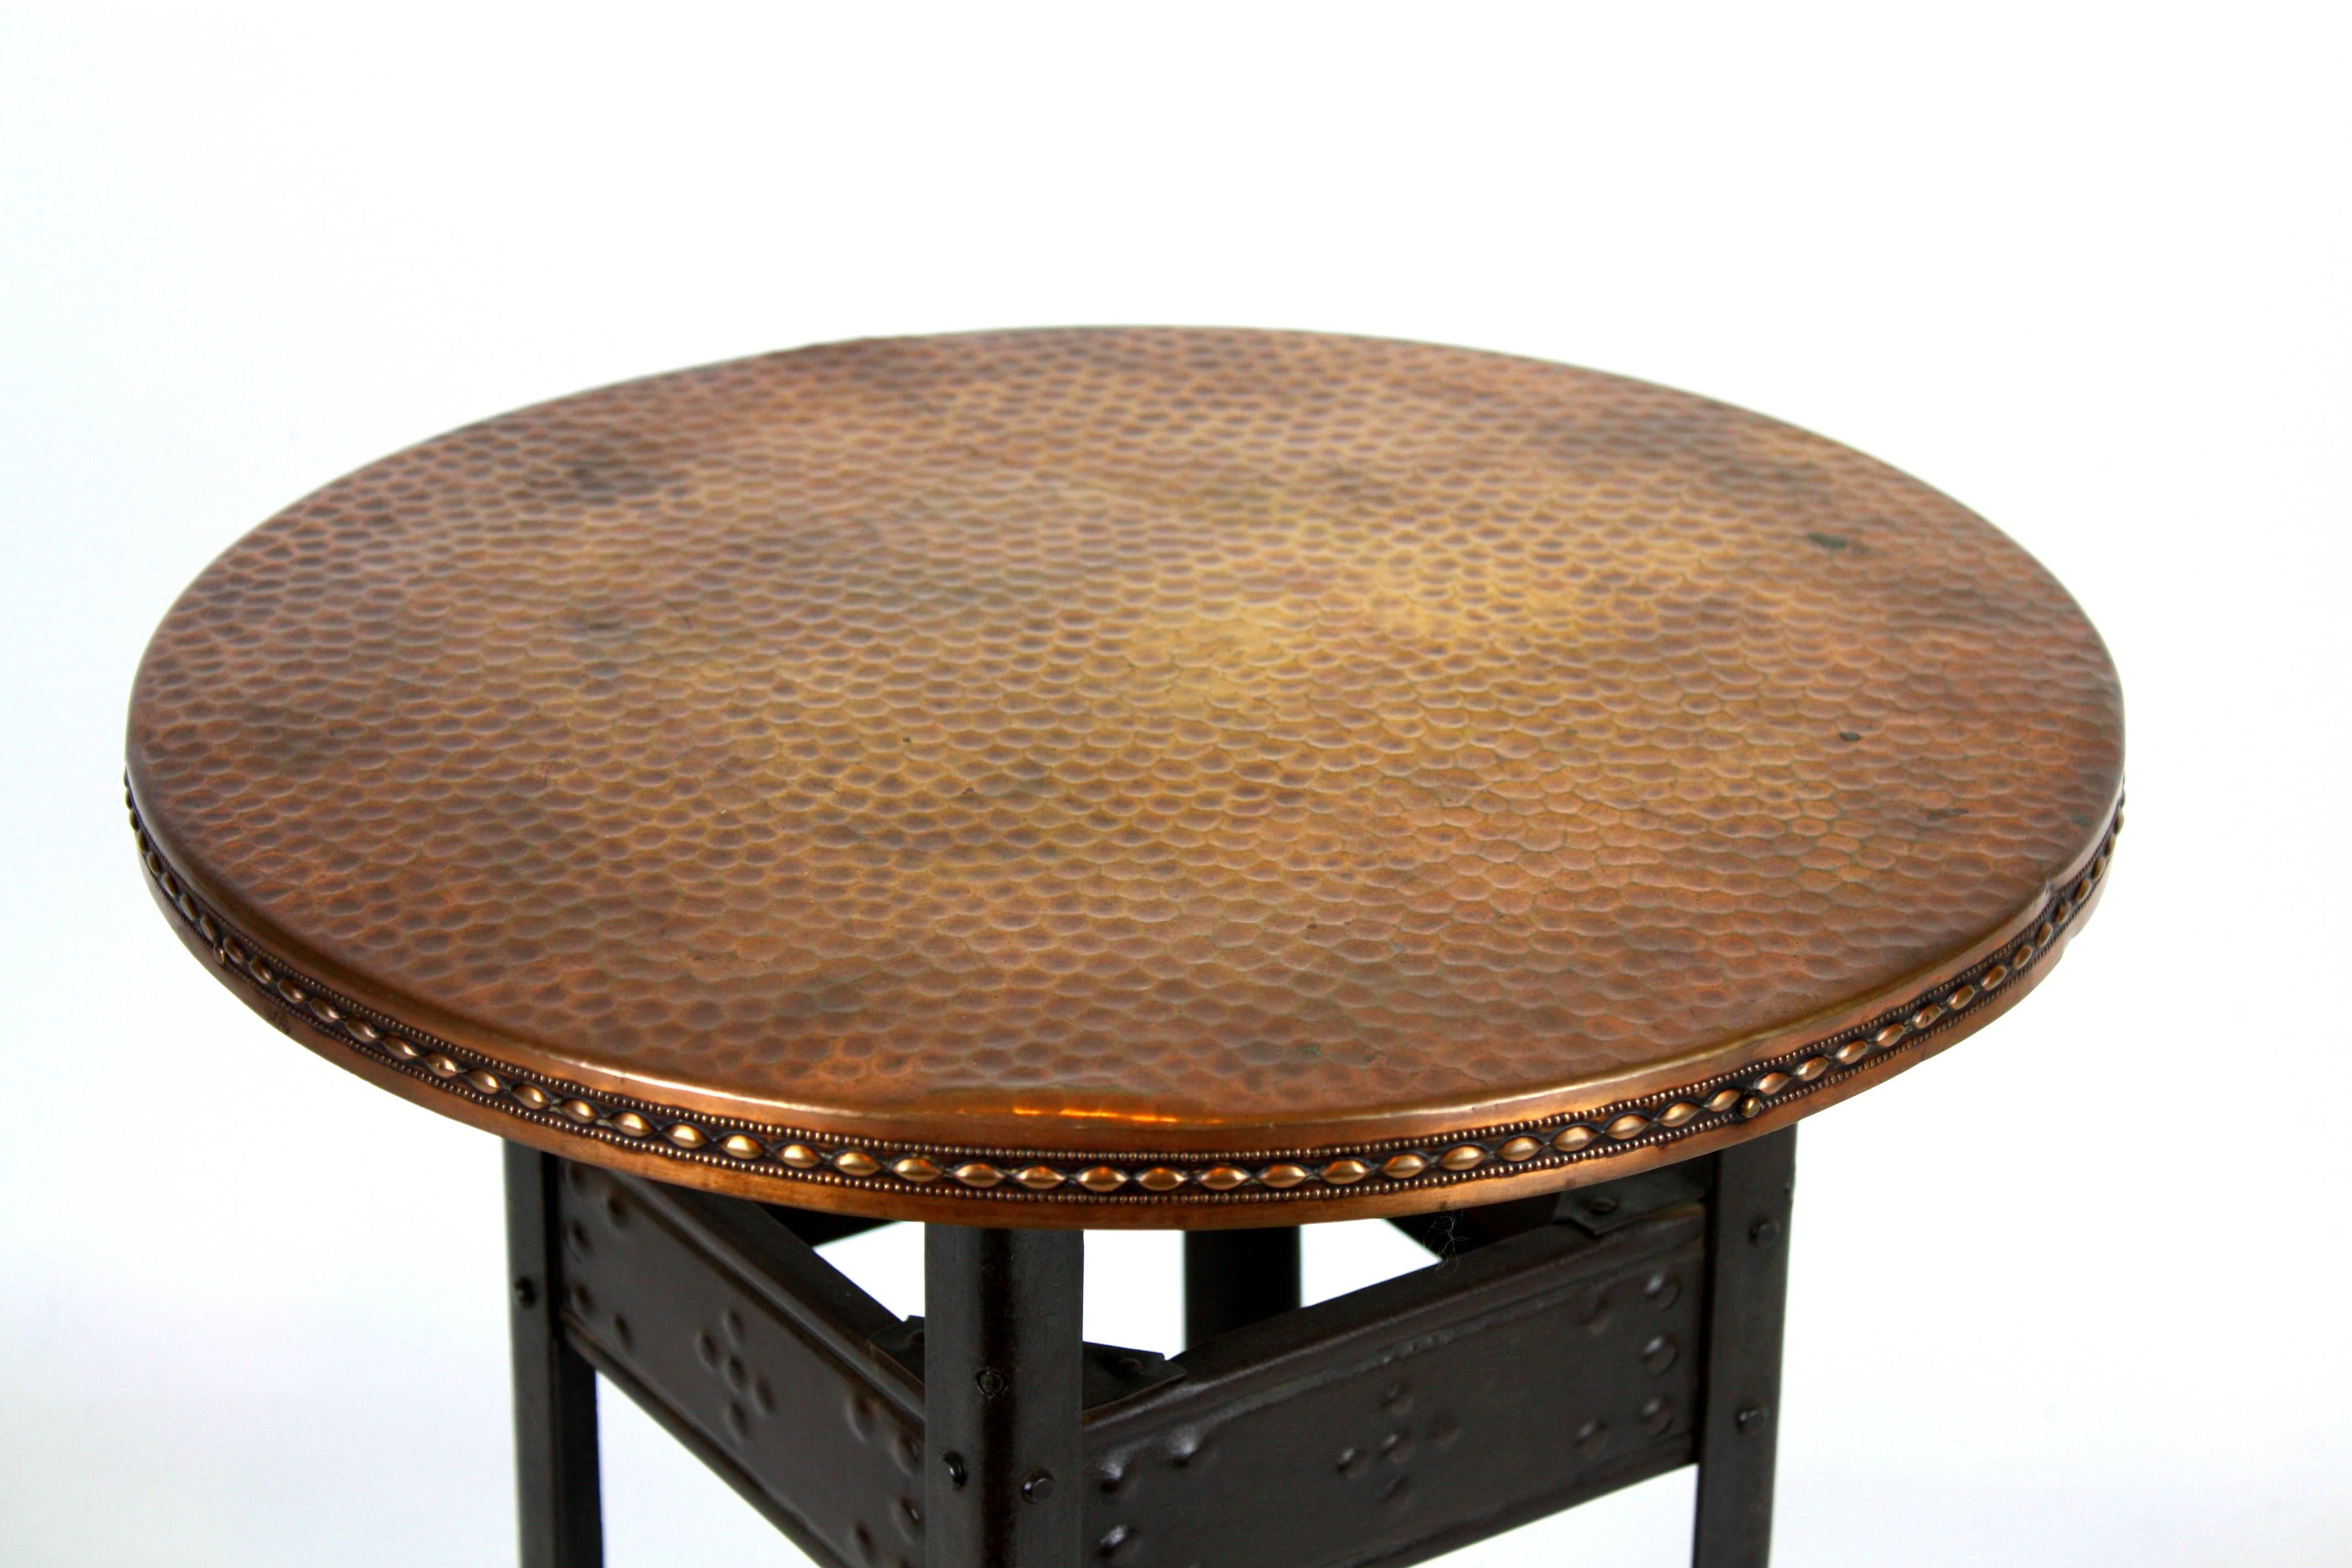 Occasional table made in France in the early 20th century.

Copper and iron hand- hammered, with beautiful details in the border of the top of the table.